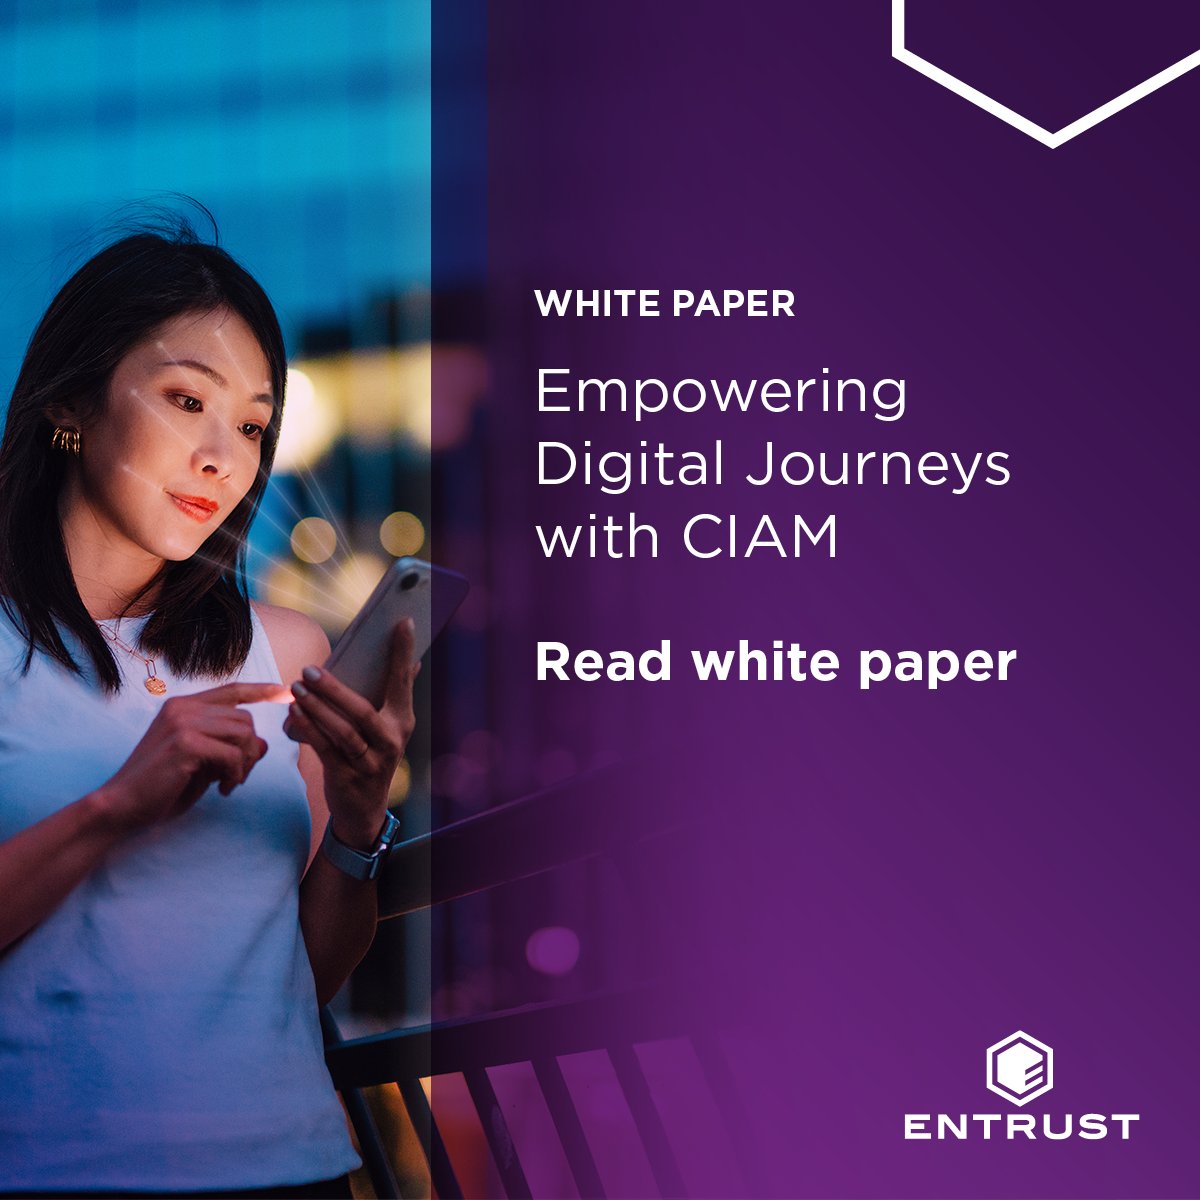 Today identity breaches are becoming more common, having a comprehensive customer identity and access management (CIAM) solution is essential. Check out our new white paper that discusses the critical components of fully integrated CIAM. bit.ly/49OwIvE